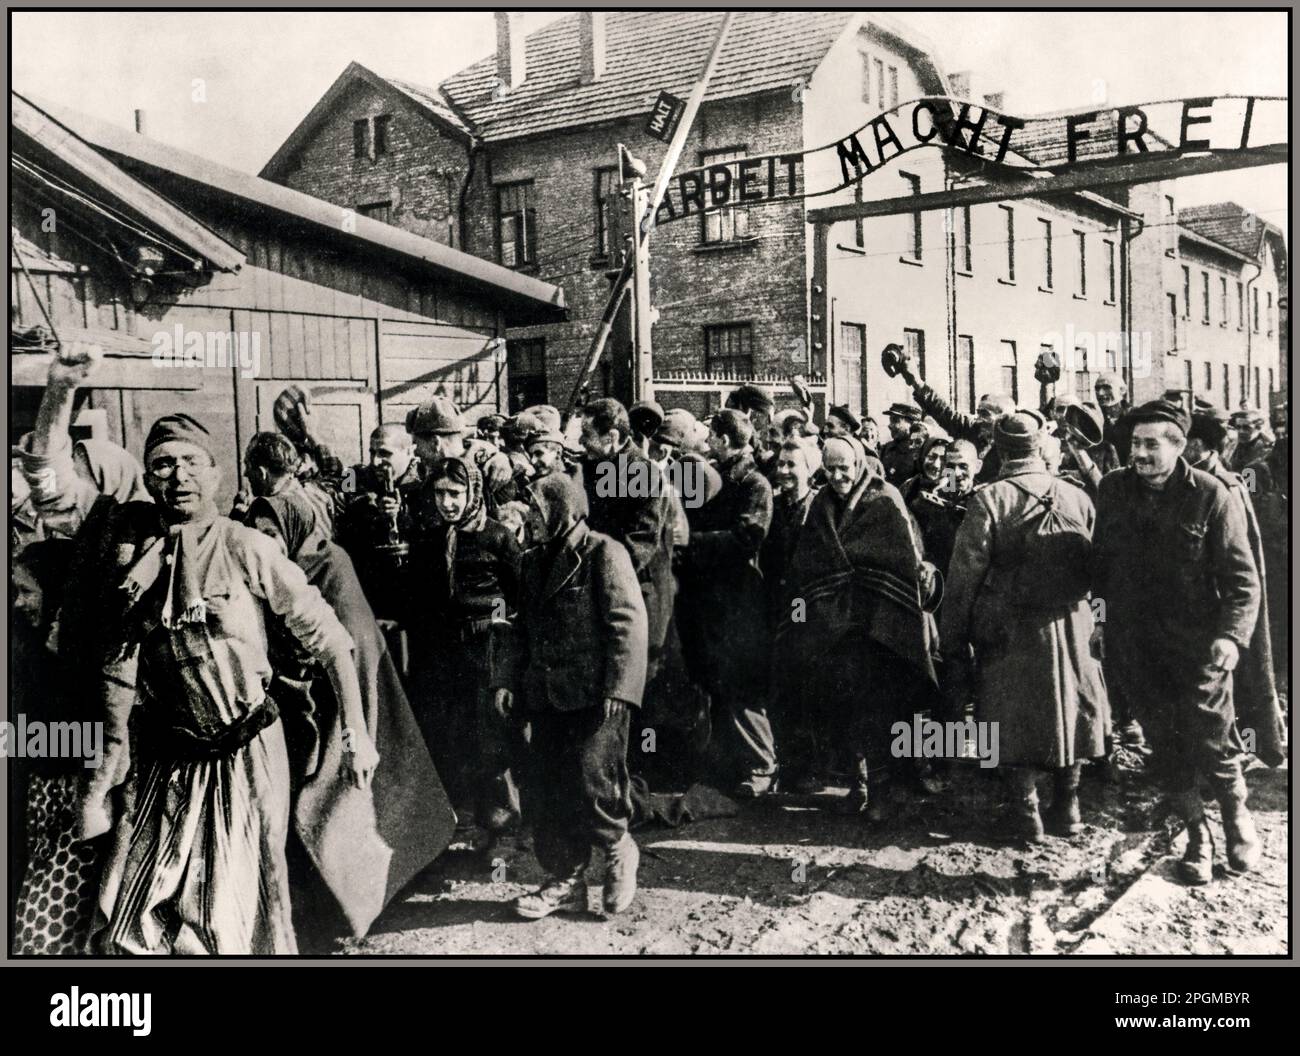 Auschwitz-Birkenau prisoners liberation by Soviet troops 26th January 1945, behind the infamous Nazi extermination & concentration camp entrance sign ARBEIT MACHT FREI. Work sets you free. WW2 World War II Second World War Occupied Poland Stock Photo